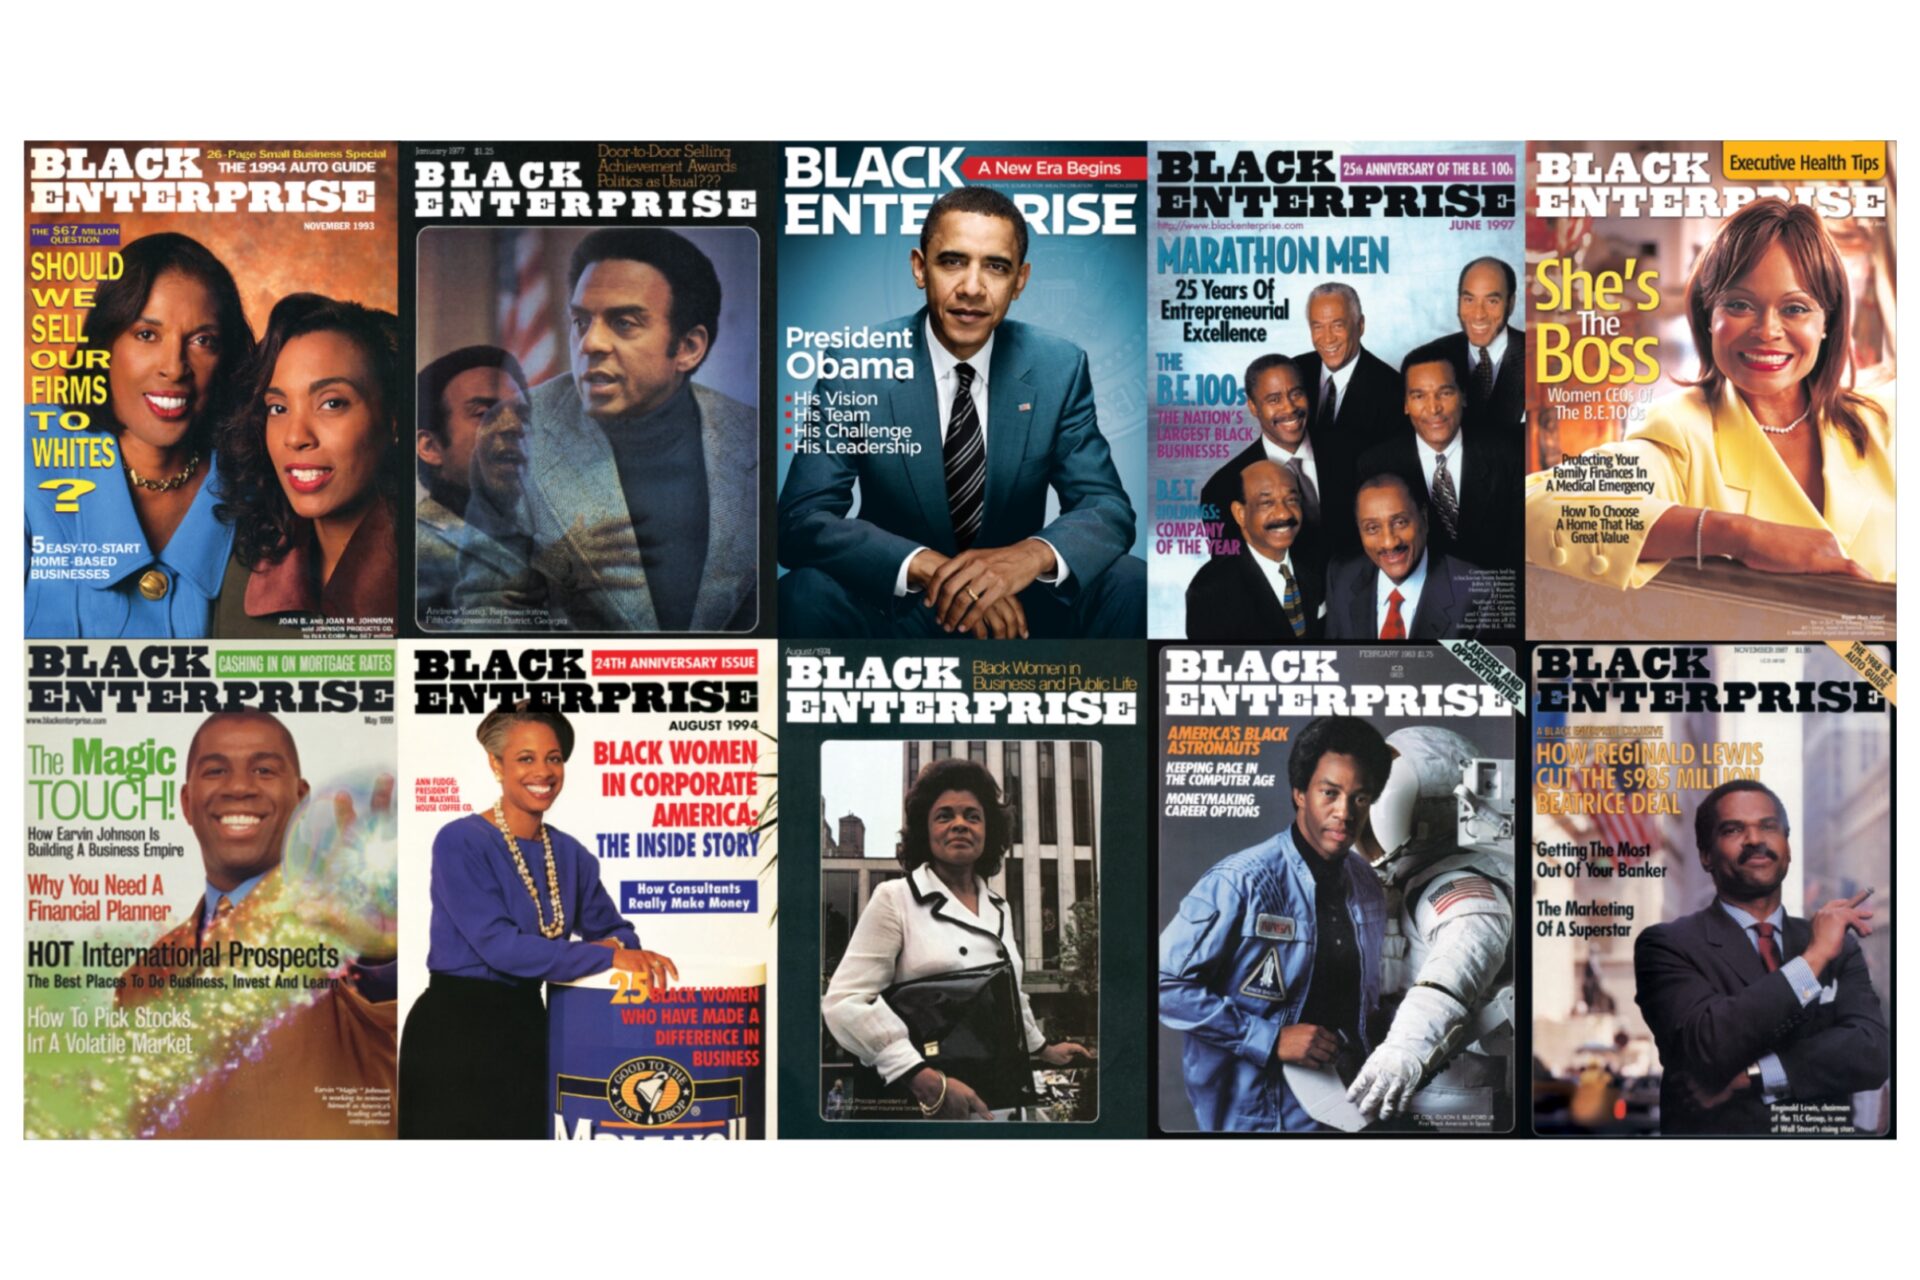 Black history covers